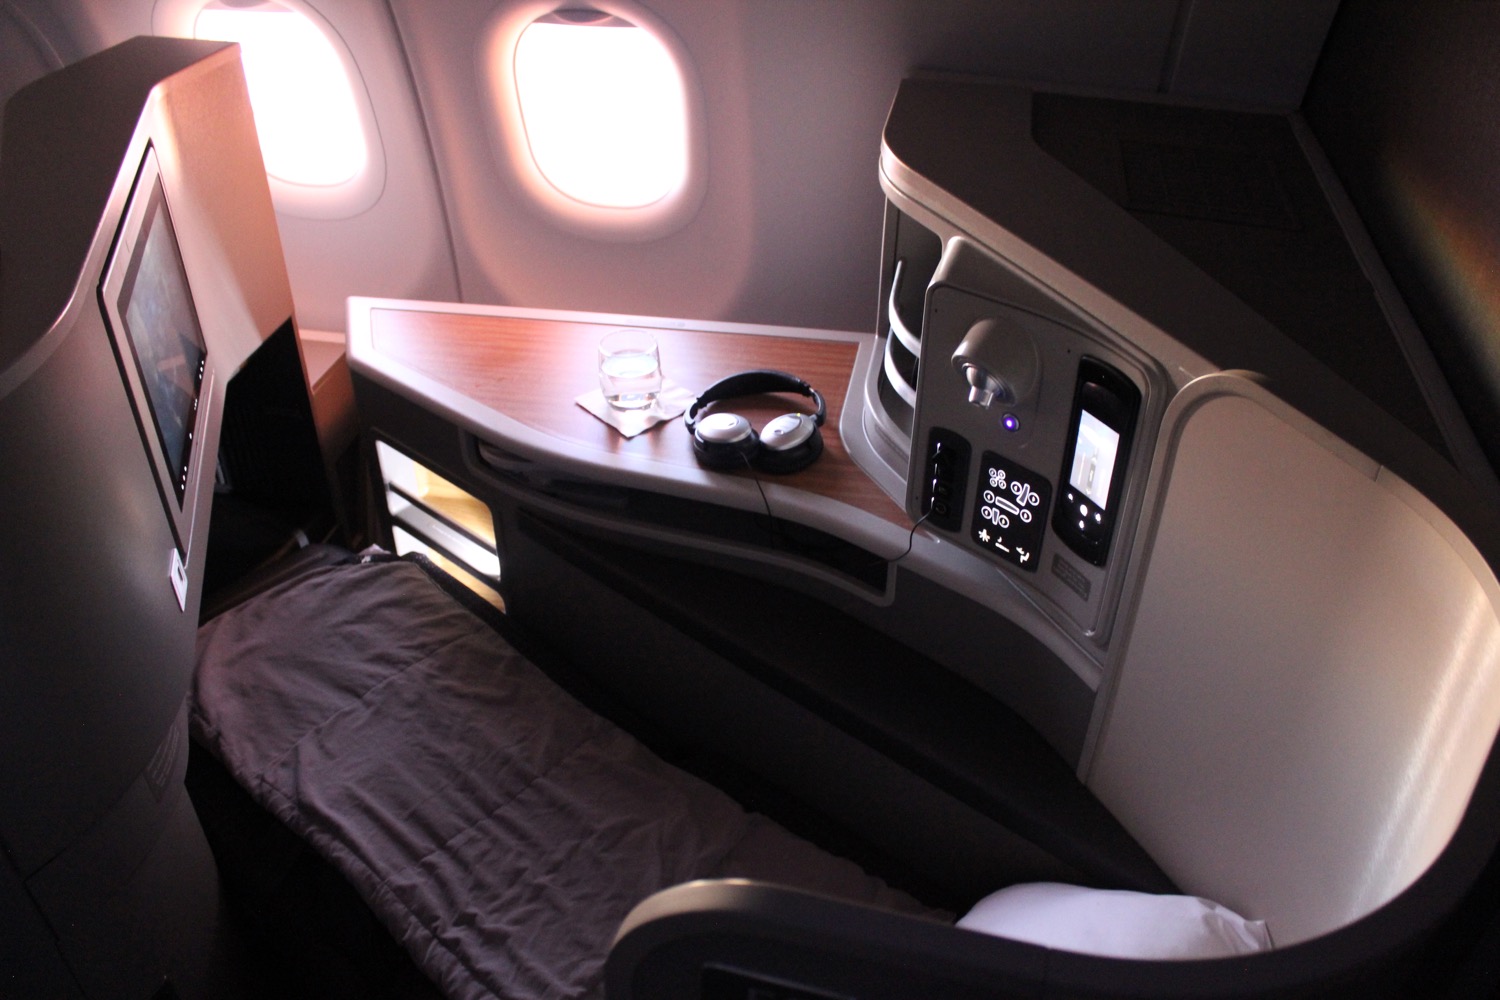 headphones on a bed in a plane